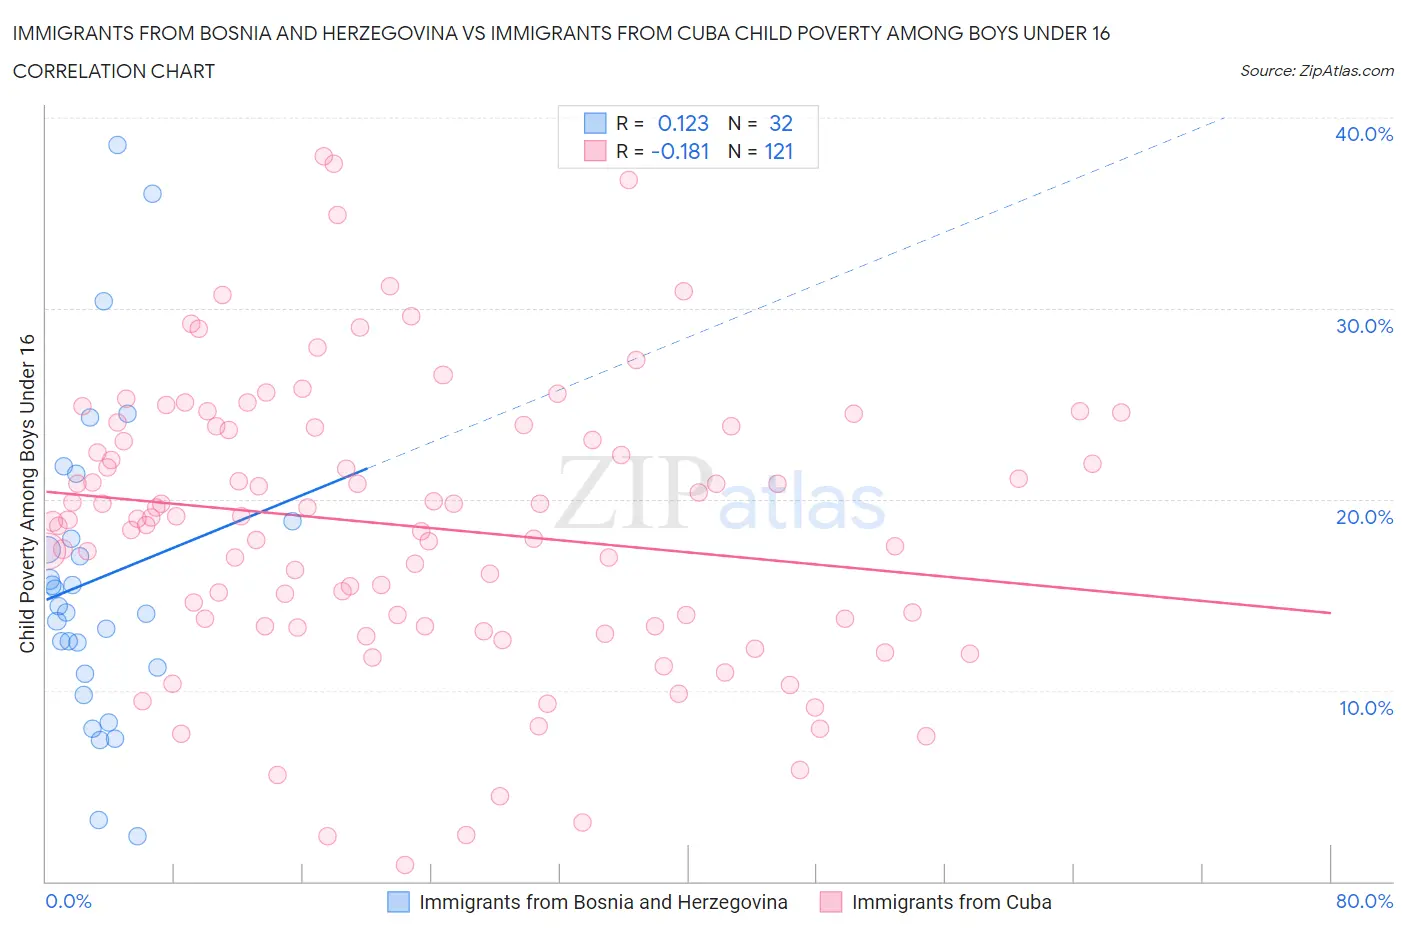 Immigrants from Bosnia and Herzegovina vs Immigrants from Cuba Child Poverty Among Boys Under 16